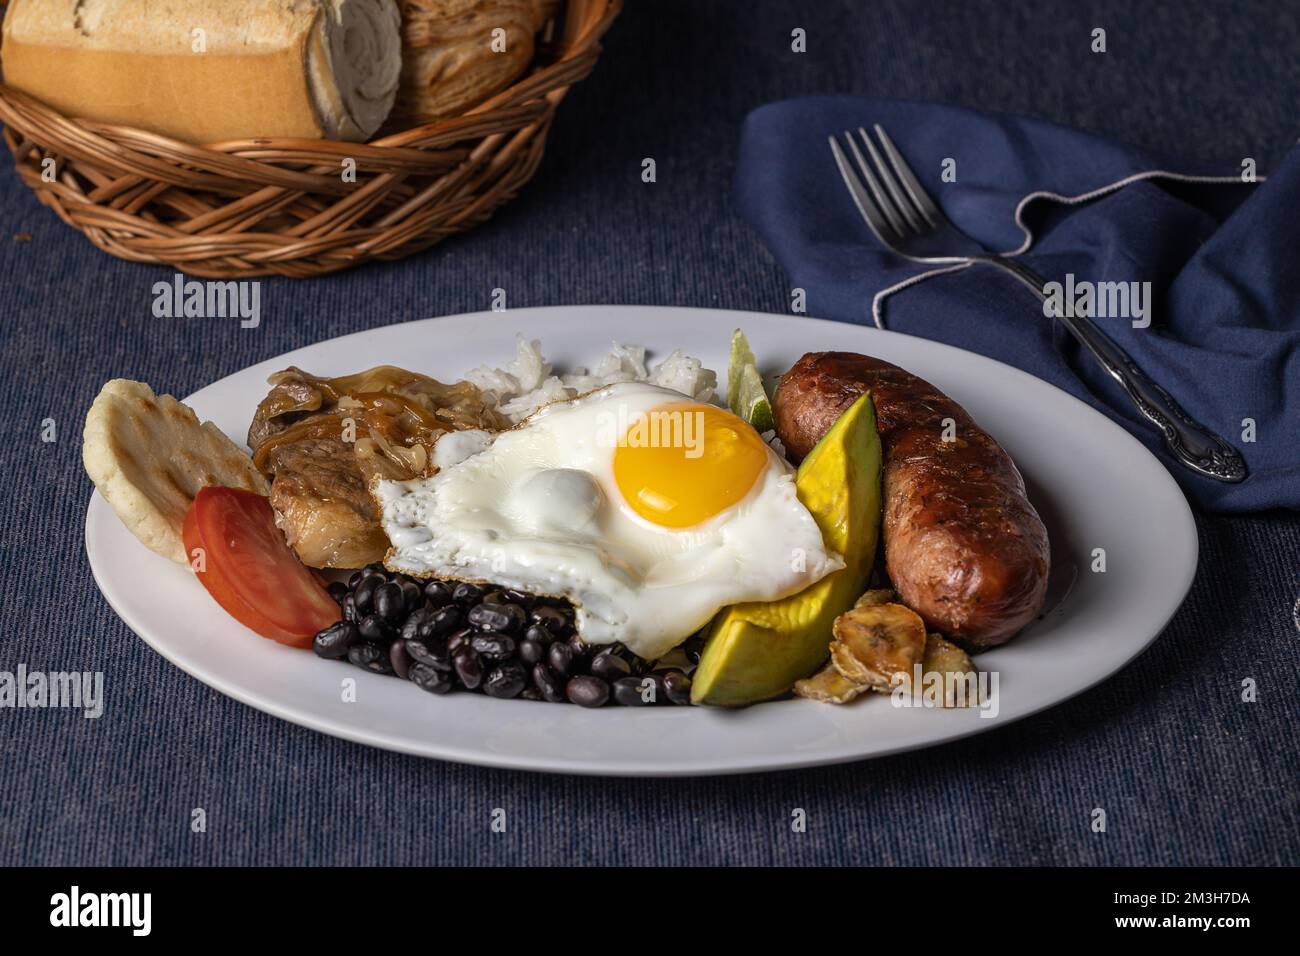 Bandeja paisa, typical food of Colombia on blue tablecloth. Stock Photo